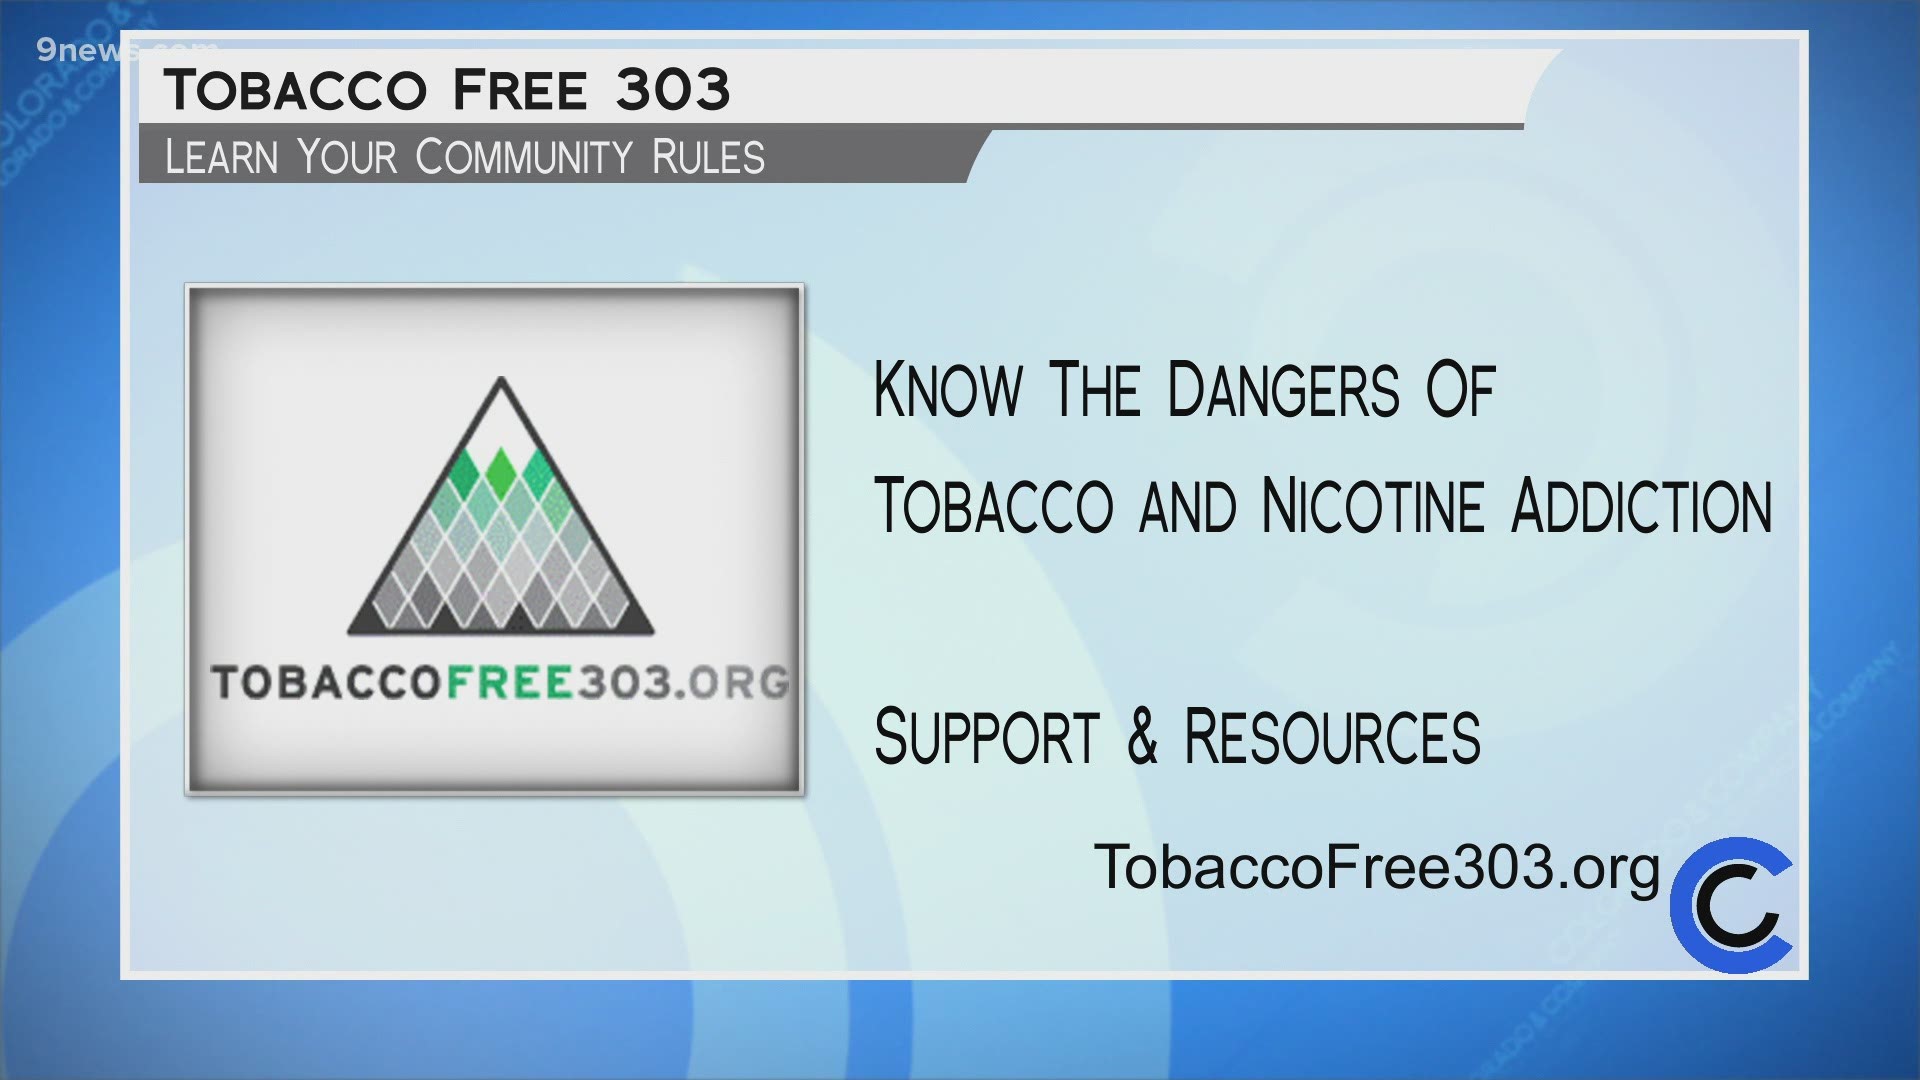 Tobacco Free 303 can help you and your kids learn about the dangers of tobacco products. Learn more at TobaccoFree303.org.